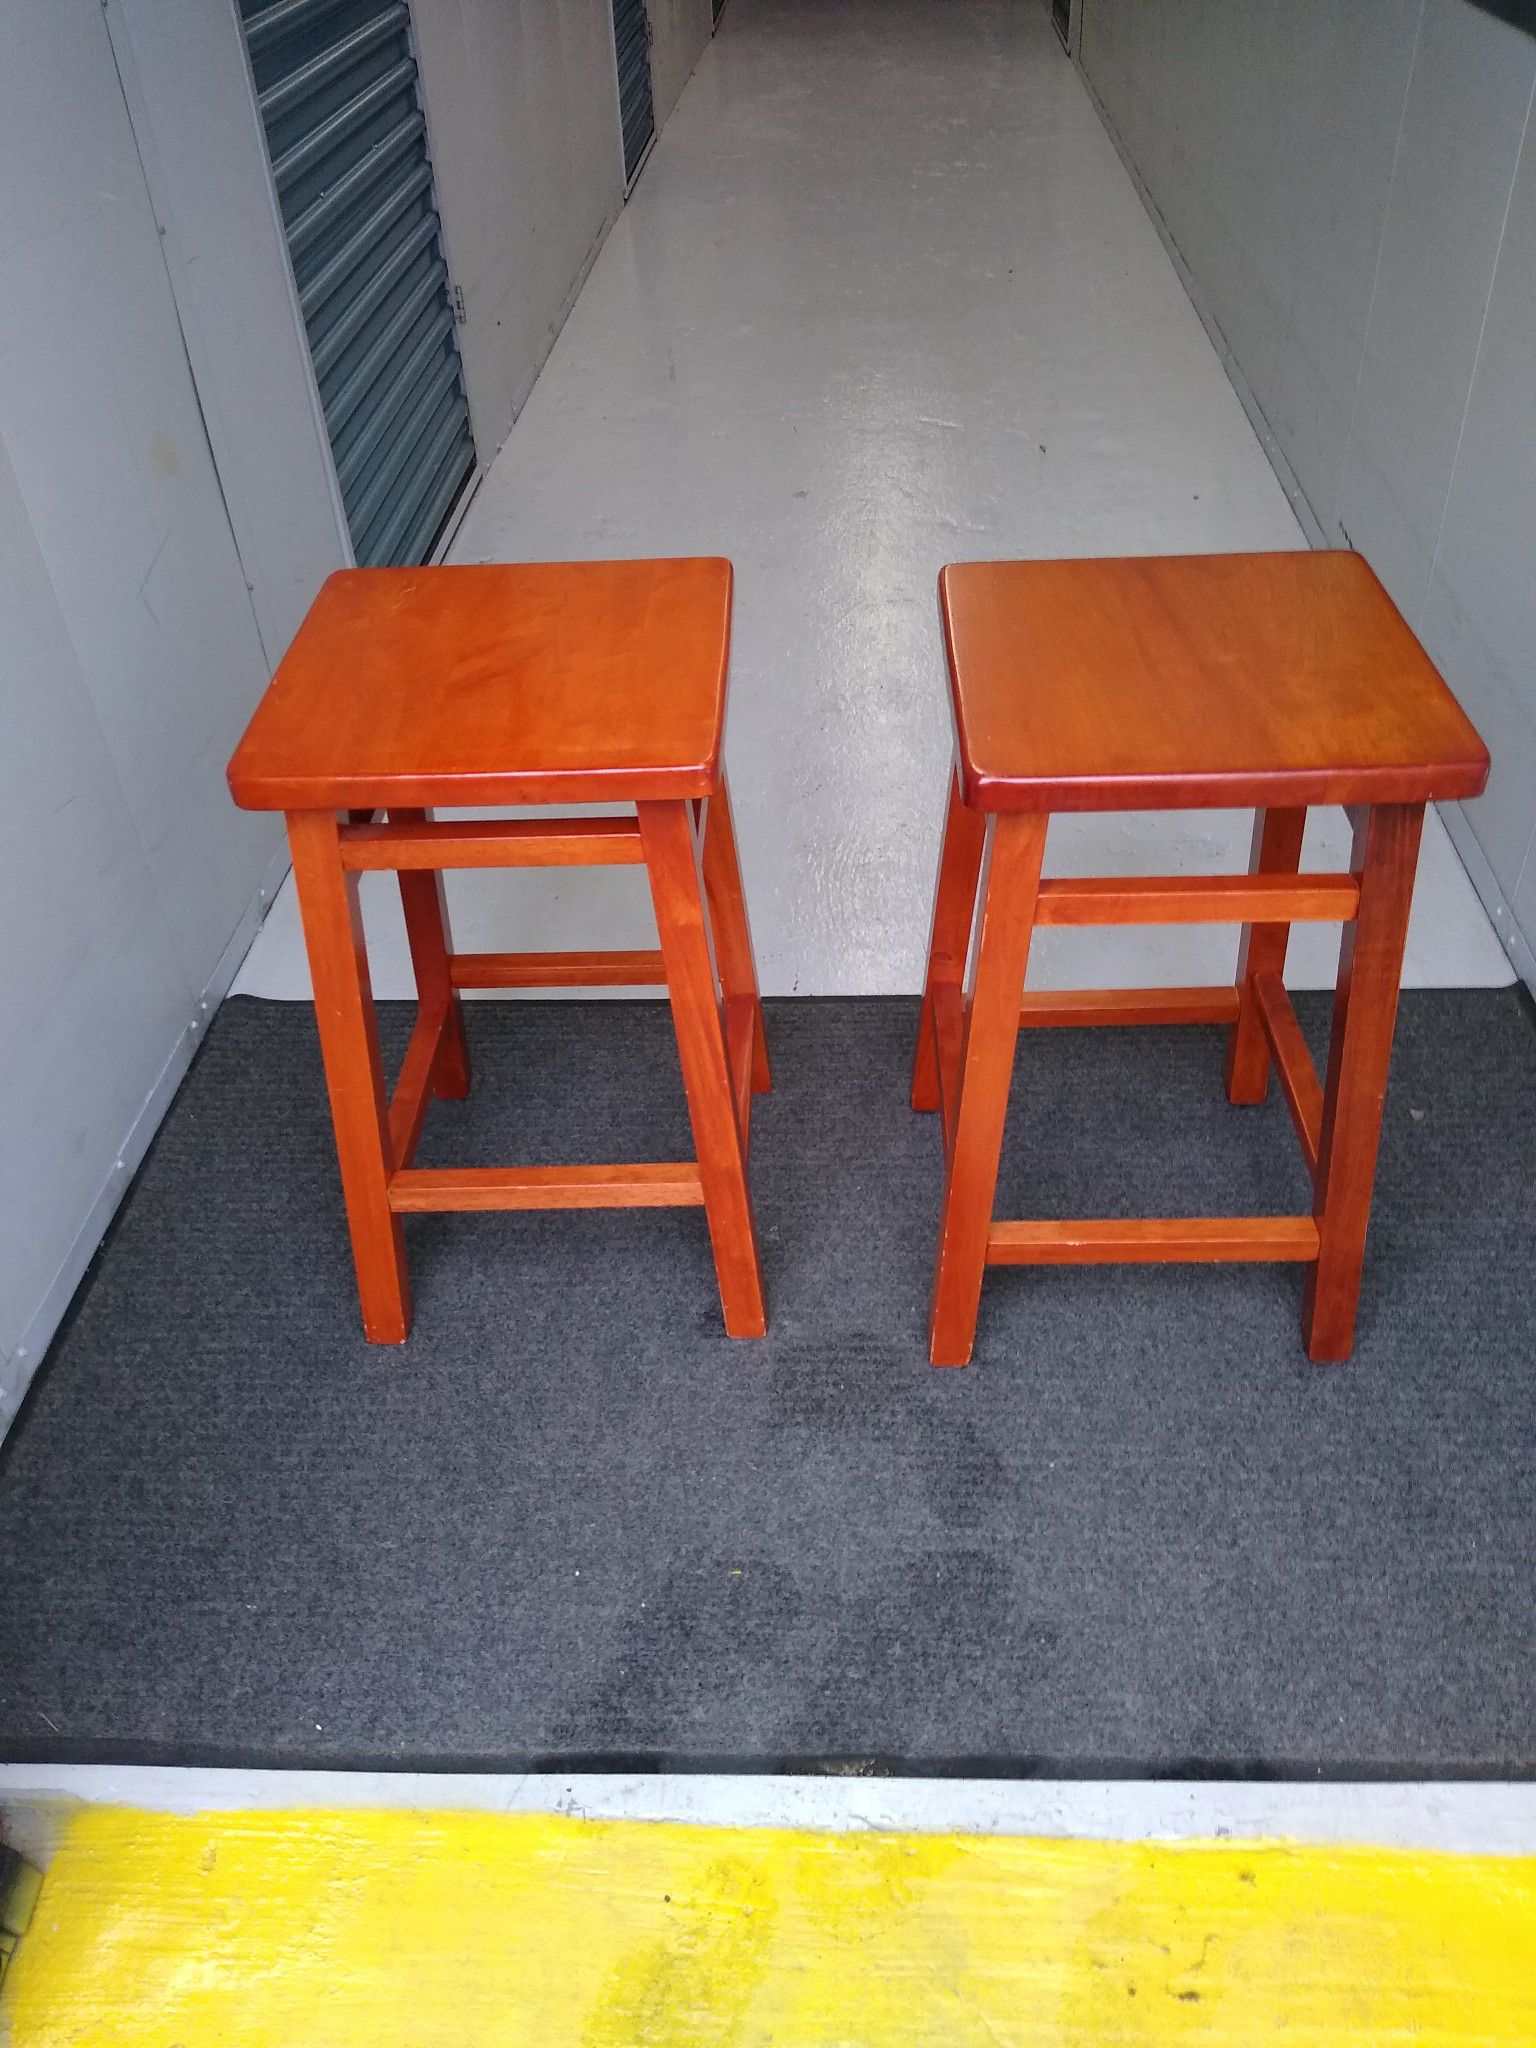 Two bar stools $20.00 are offer